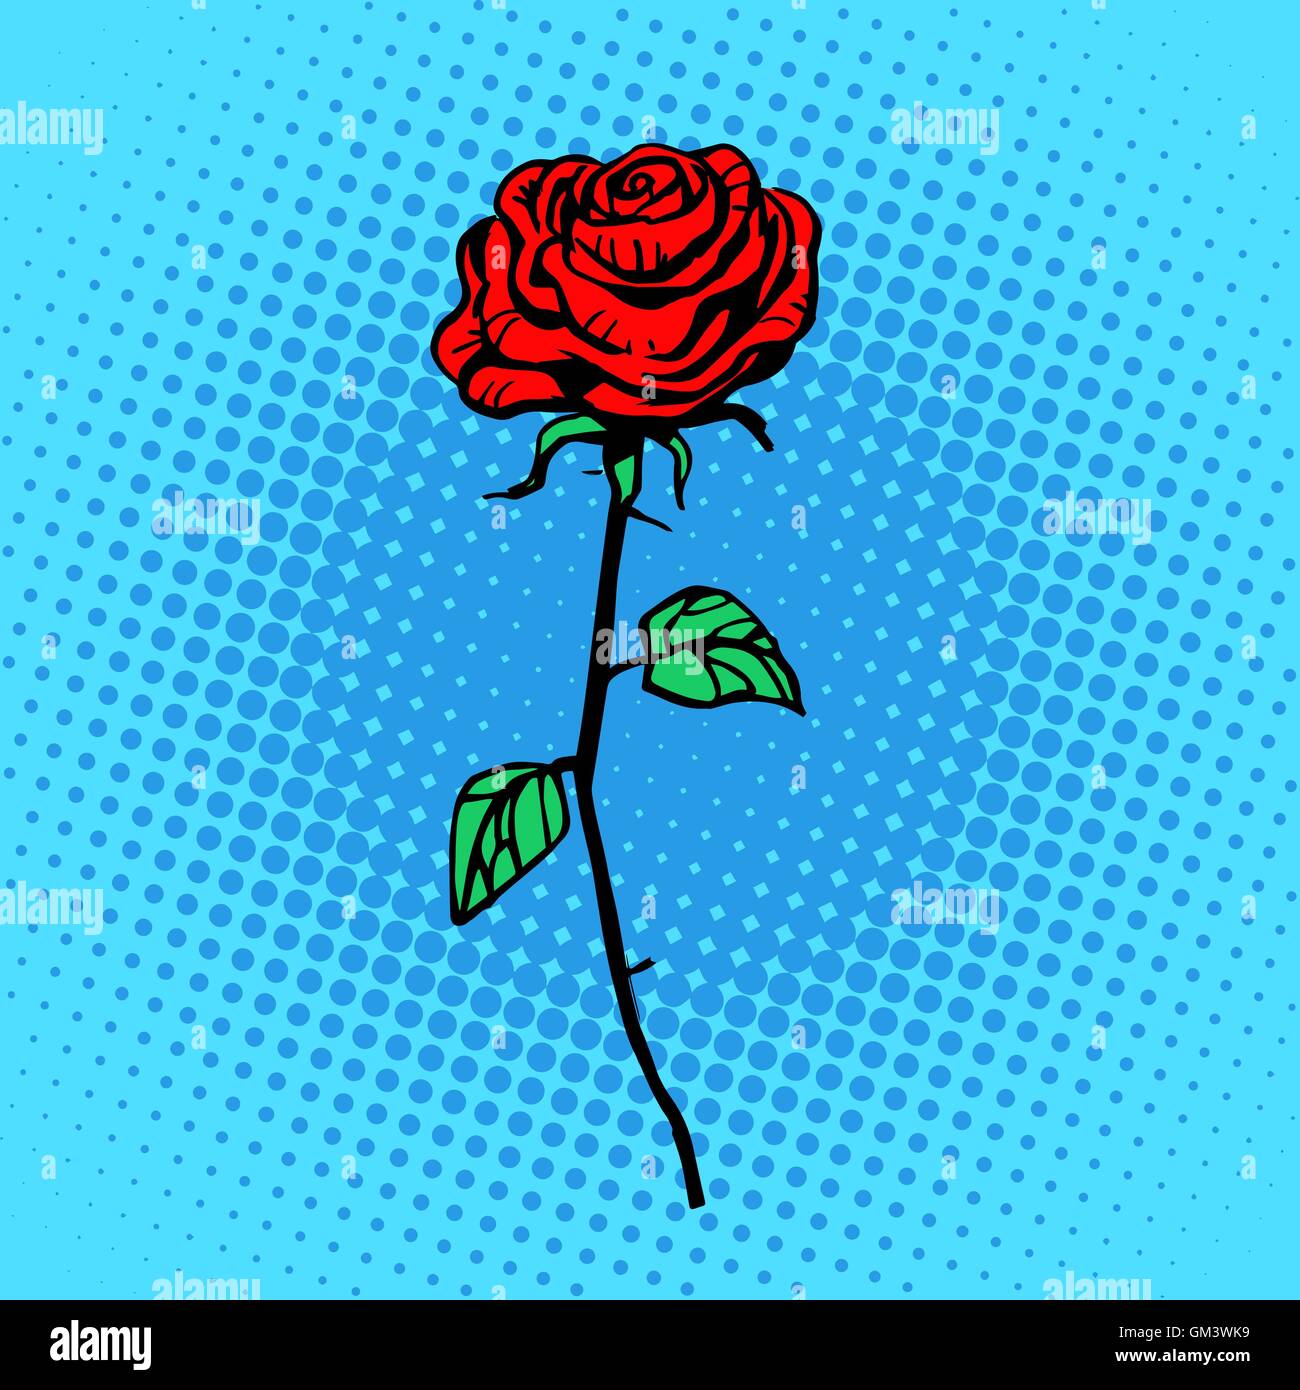 Flower red rose stem with thorns Stock Vector